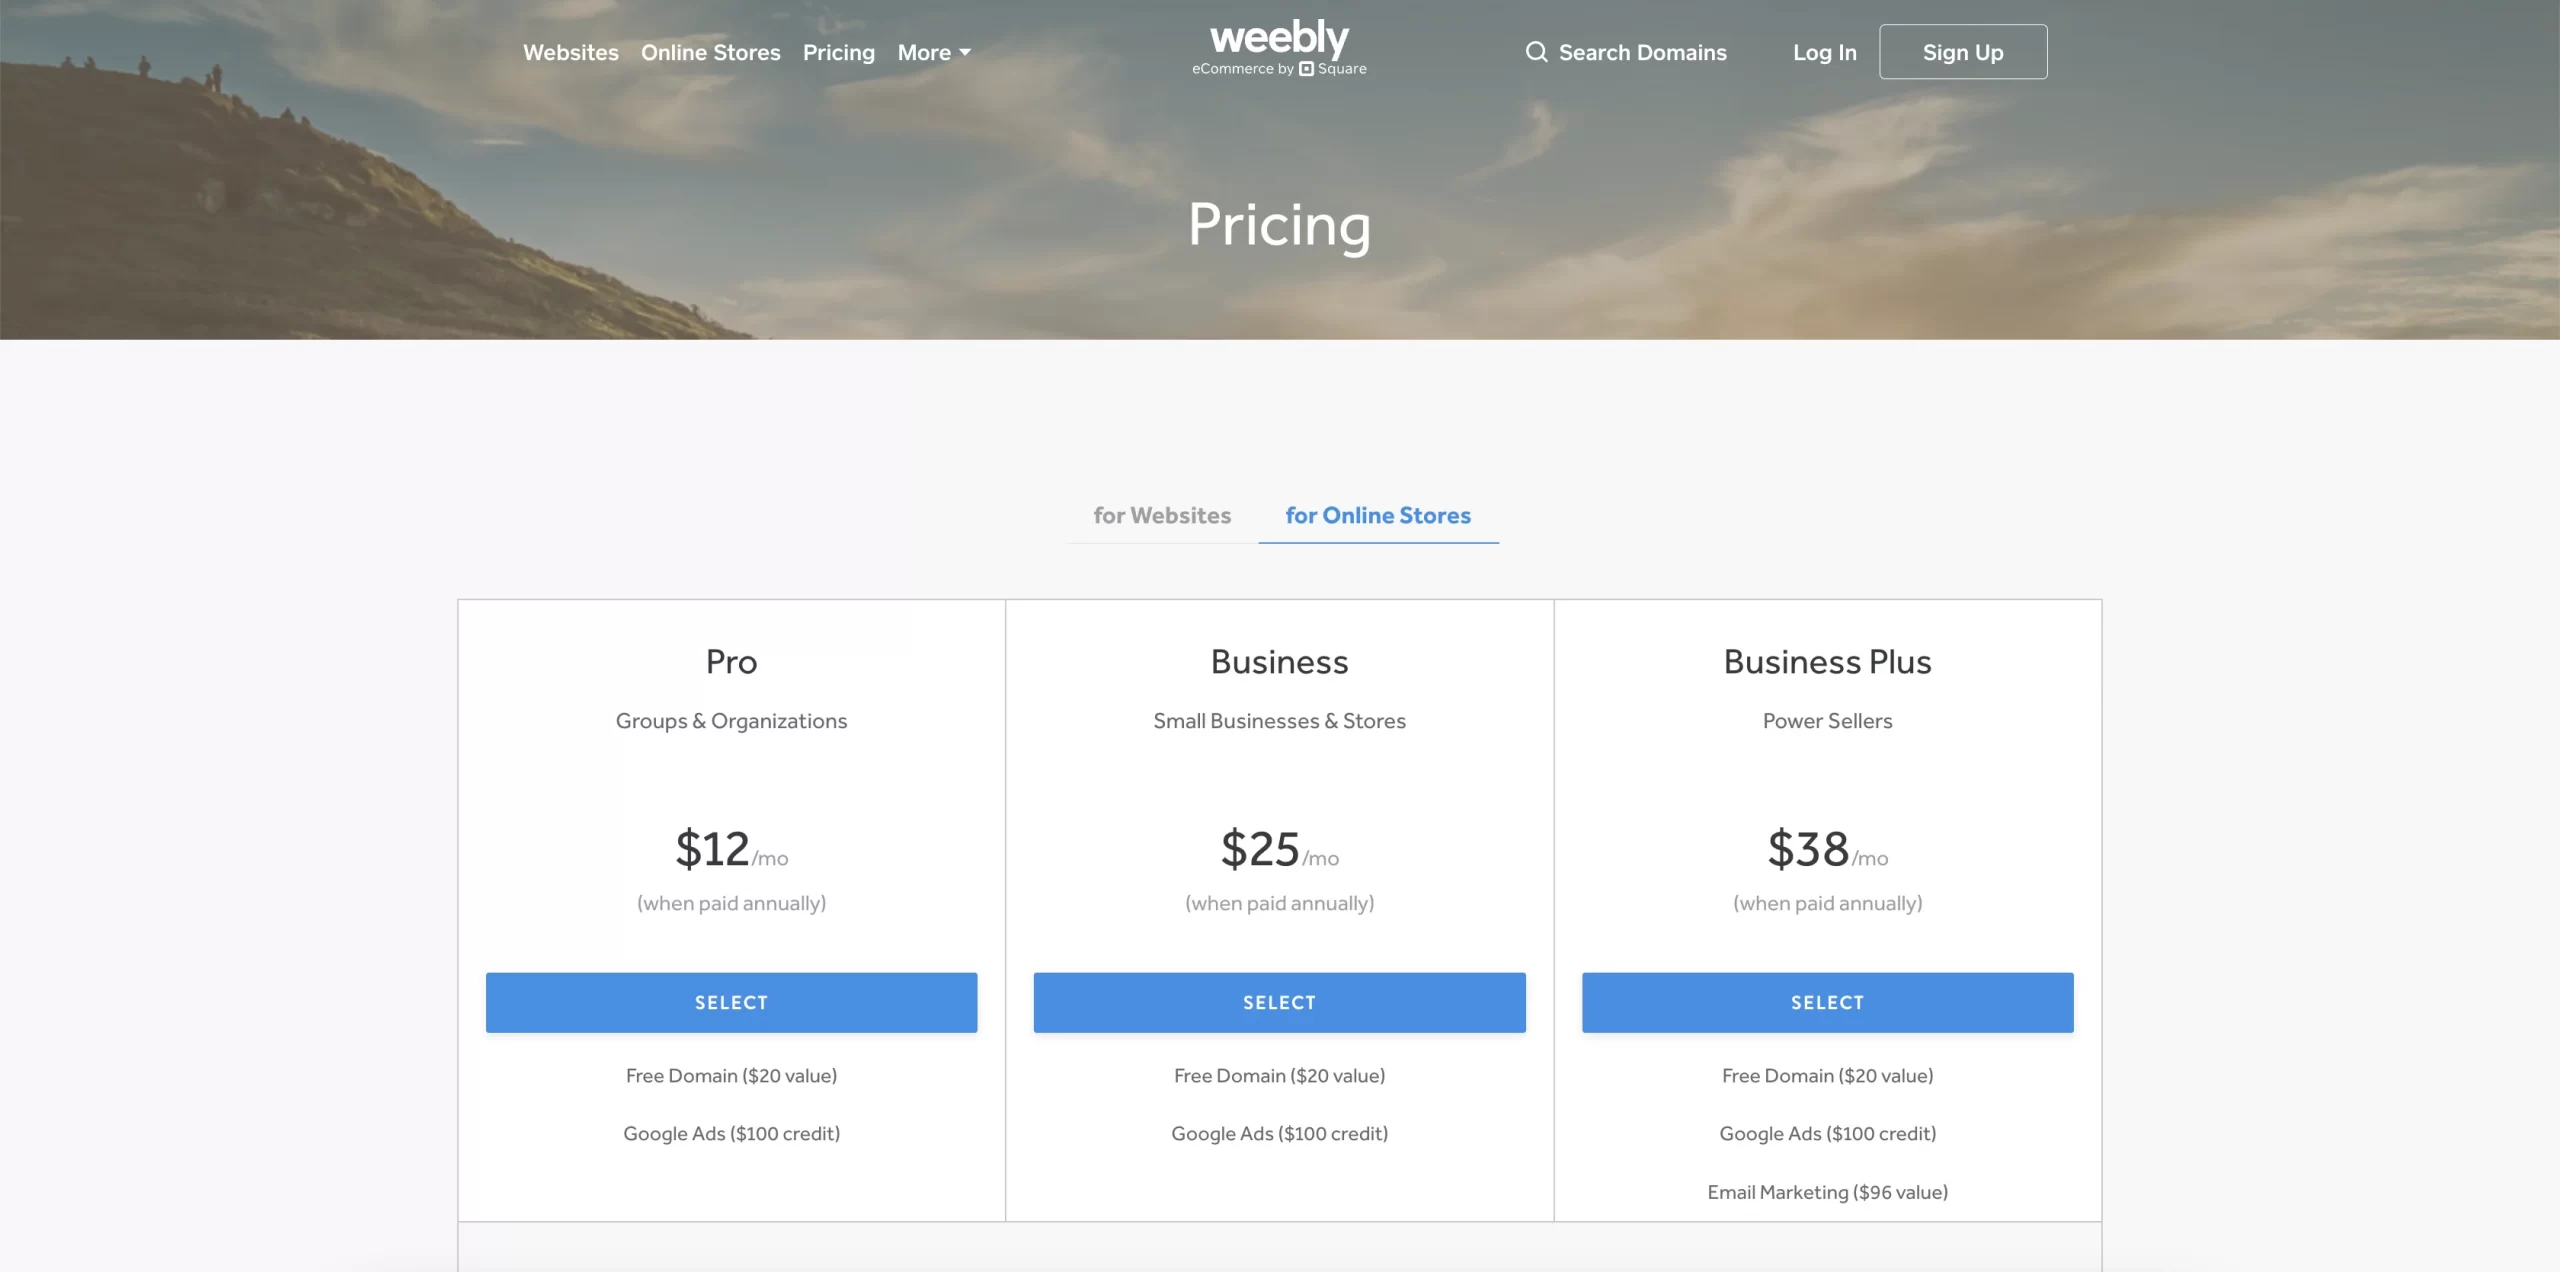 Weebly Pricing